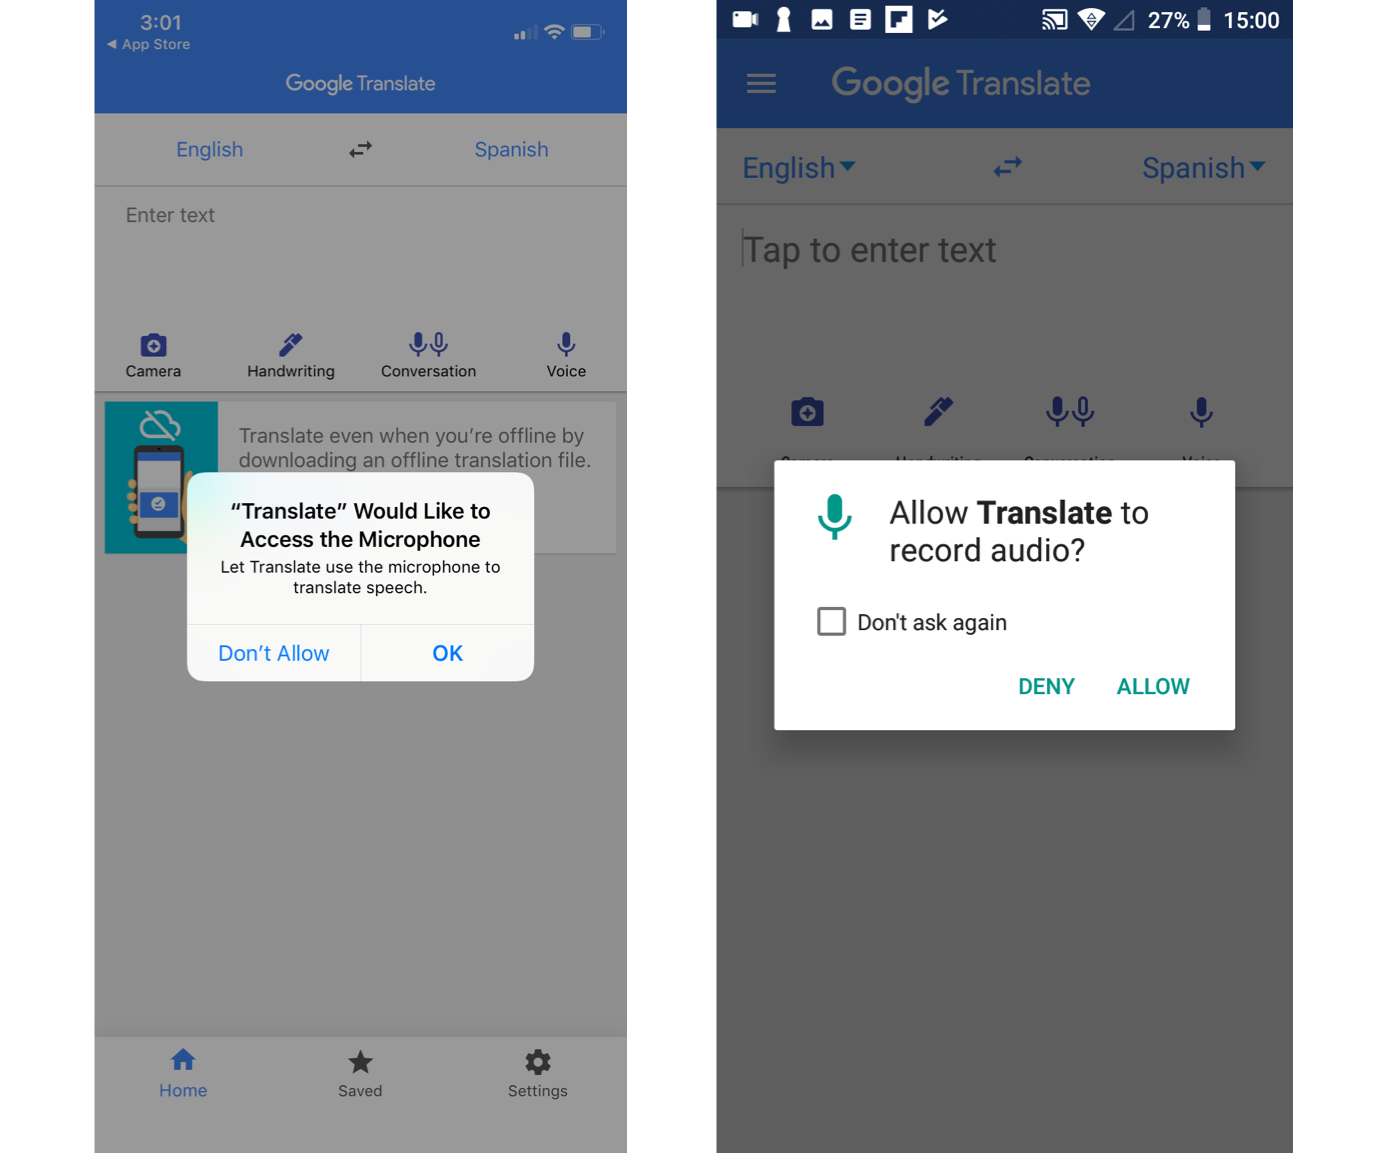 An image of the permission requests from Google Translate on iOS and Android side-by-side. The permission request asks the user to allow Google Translate access the microphone to enable dictation.